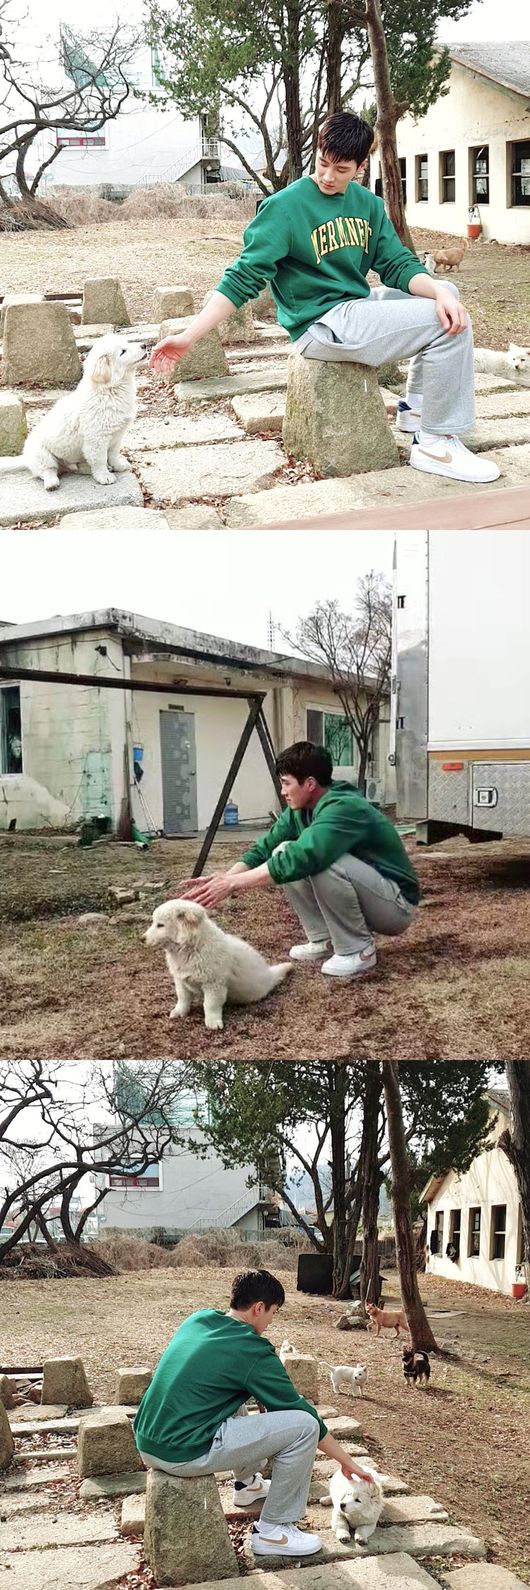 Actor Ahn Bo-hyun has had a happy time with puppyOn the afternoon of the 19th, Ahn Bo-hyun posted a photo passport on his personal SNS saying dumb.In the photo, Ahn Bo-hyun is having a relaxing afternoon sharing a sympathy with white poppy.The fashion sense that seems to be decorating such as green sweatshirt, comfortable pants, sneakers is outstanding.Especially, the fans who watched this are praised for their cute charm, saying, I want to be that dog, I want to be a dog, I am so sorry this weeks barracks and Who poppy.Meanwhile, Ahn Bo-hyun is currently appearing on JTBC Itaewon Klath.Ahn Bo-hyun SNS